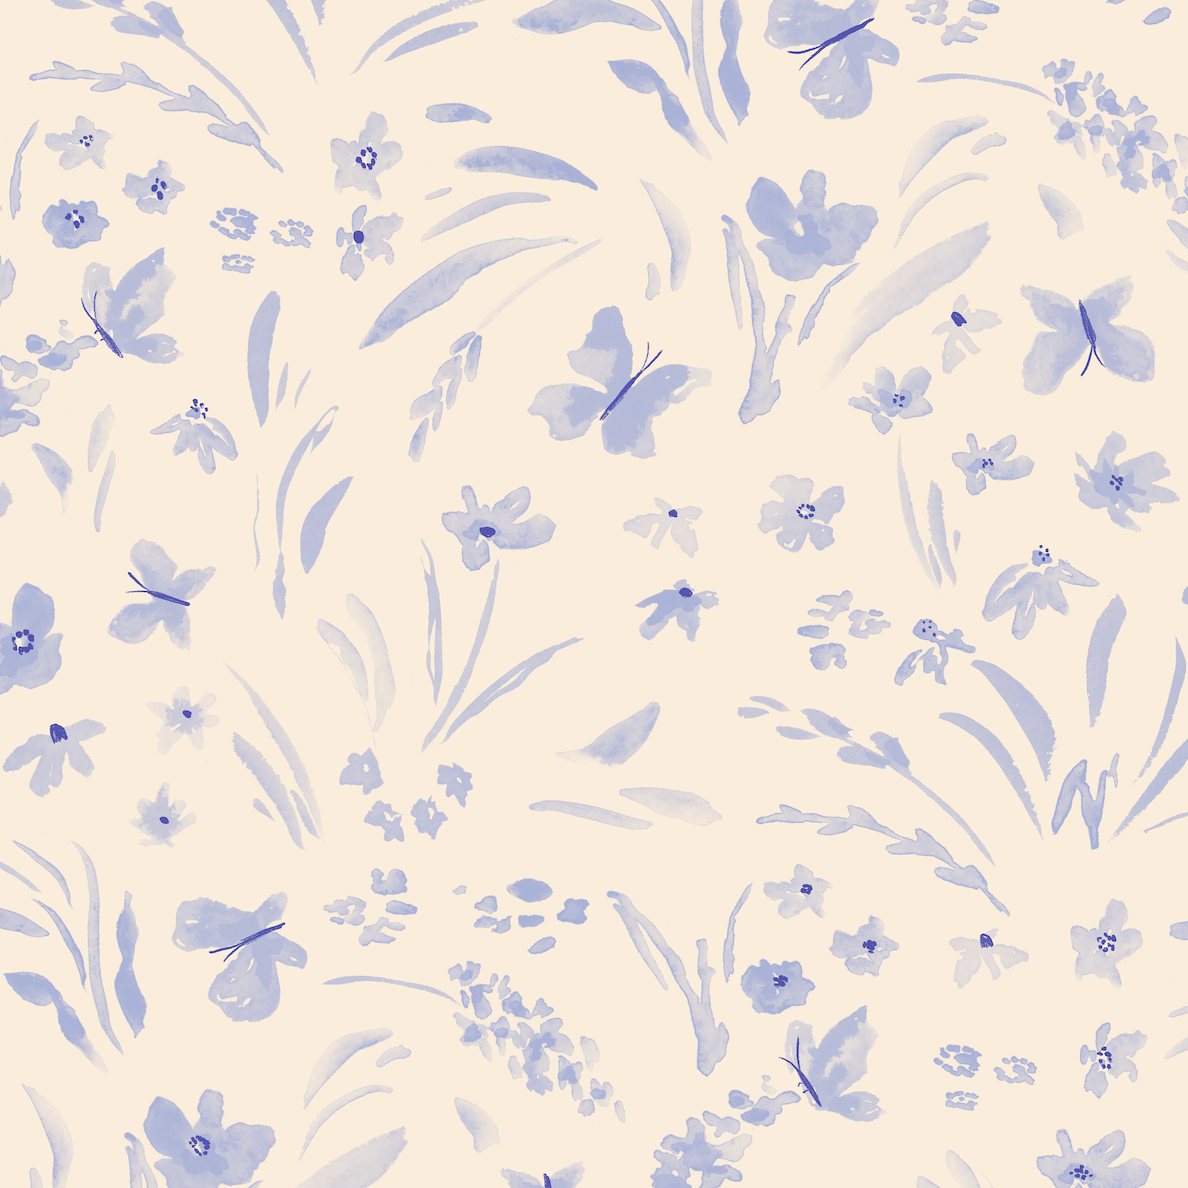 Load image into Gallery viewer, Butterfly Meadowland Wallpaper Repeat Pattern Cyan - Munks and Me Wallpaper
